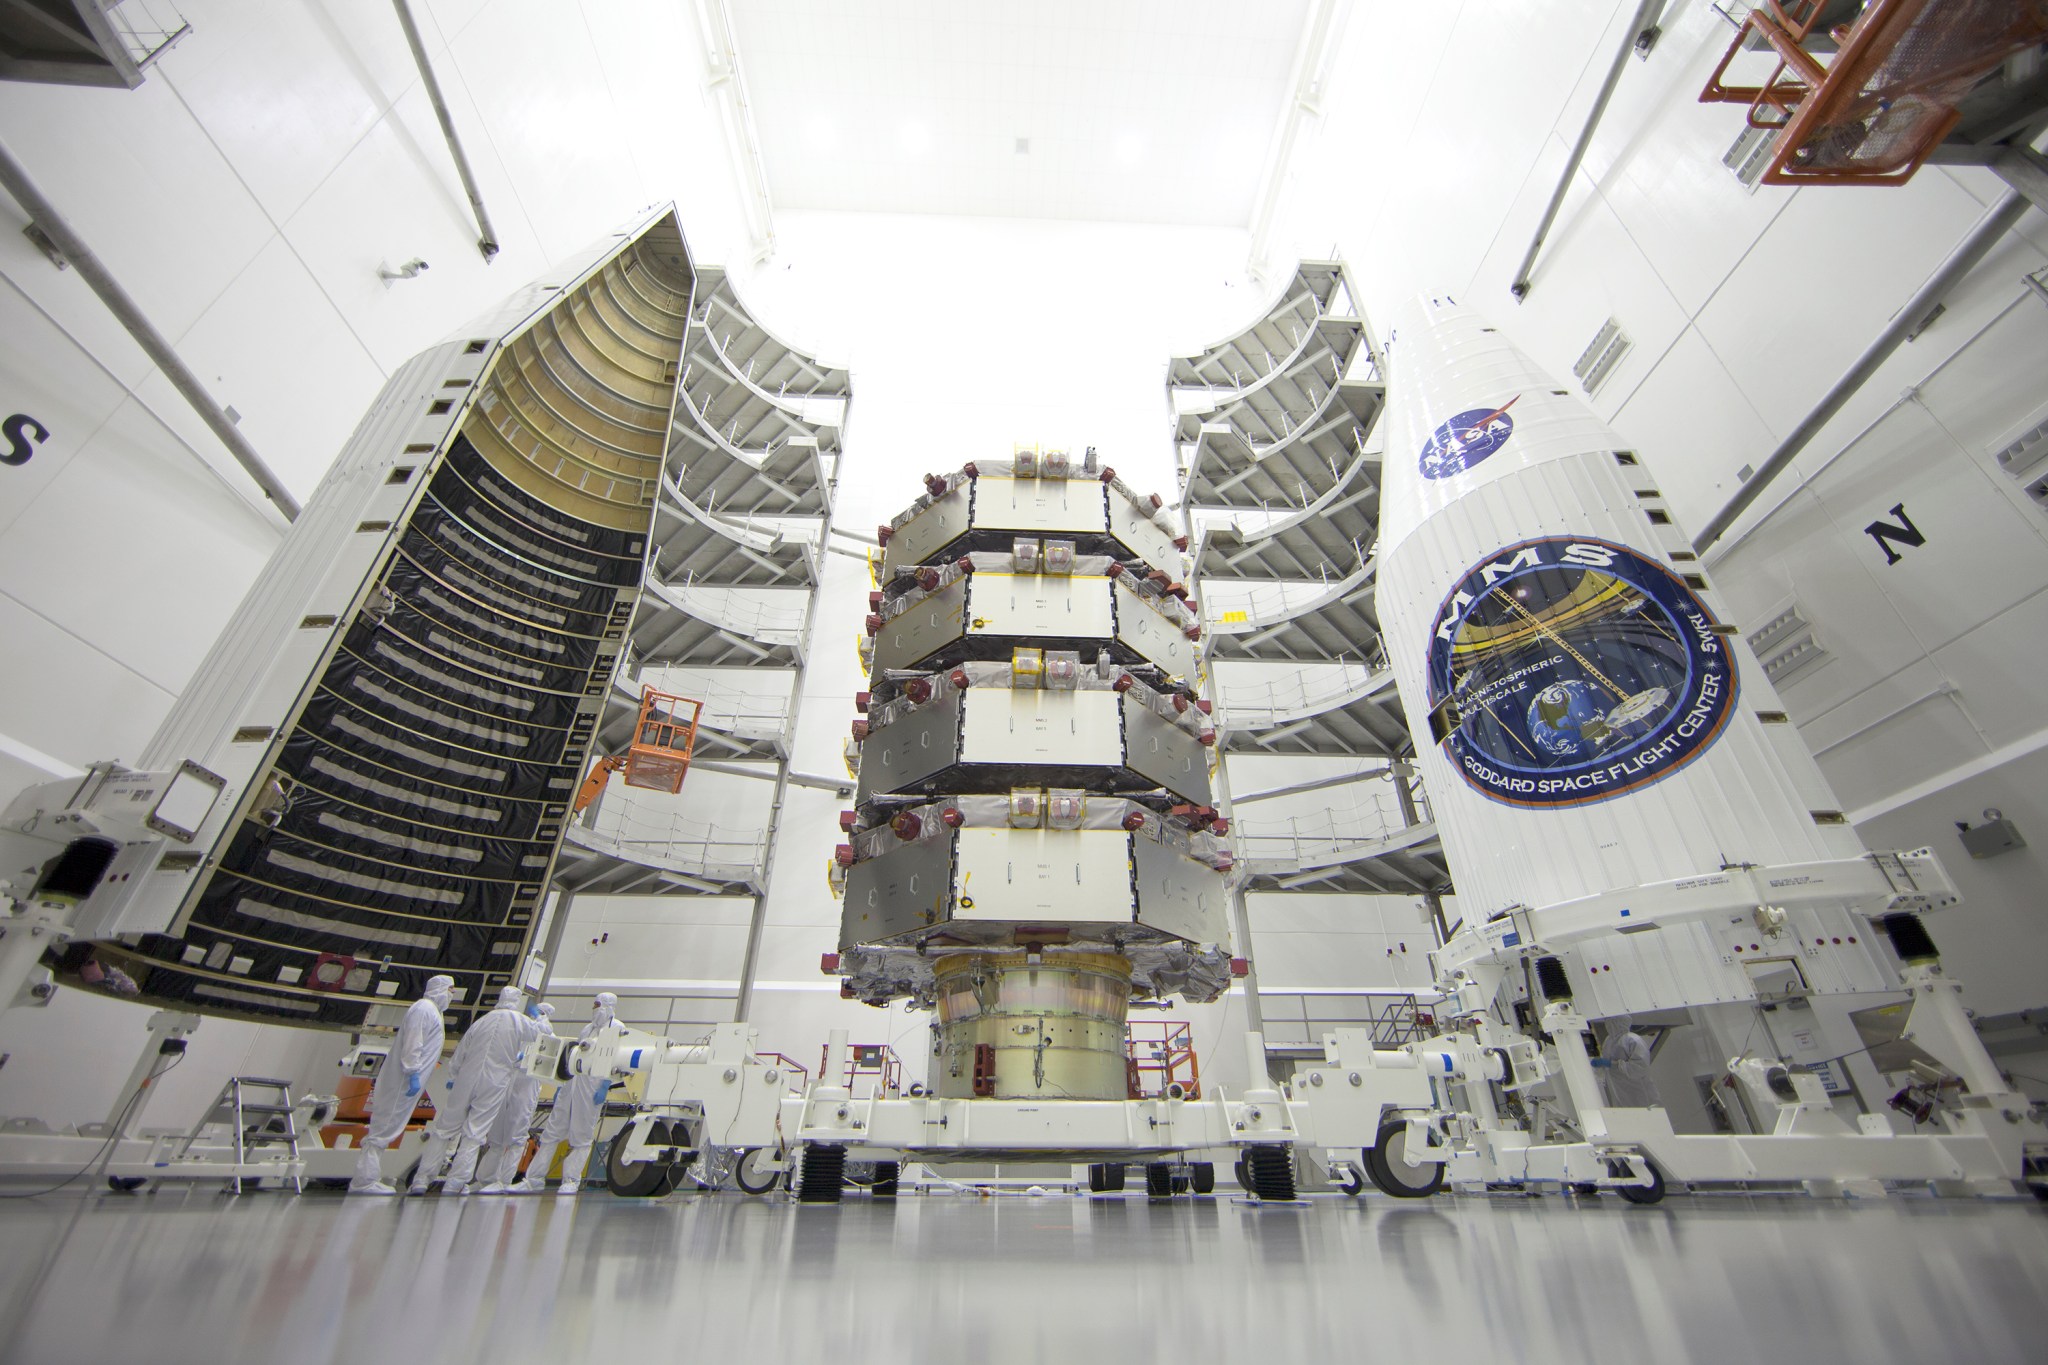 NASA's Magnetospheric Multiscale (MMS) observatories in the clean room being processed for launch.